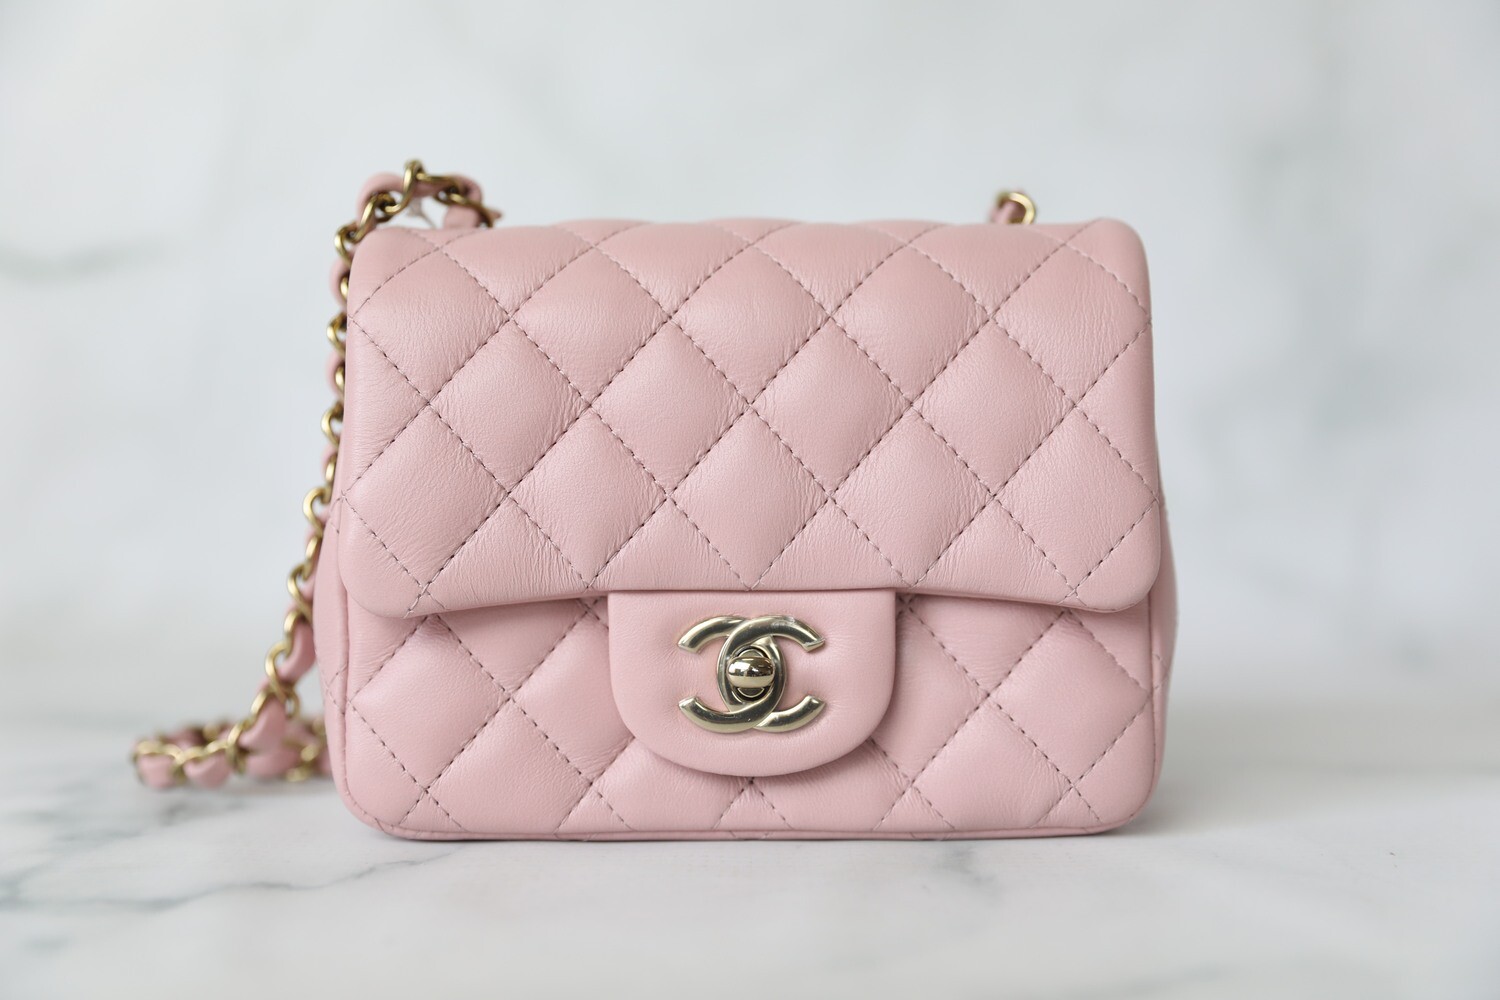 Chanel Classic Mini Square, Pink Calfskin with Gold Hardware, New